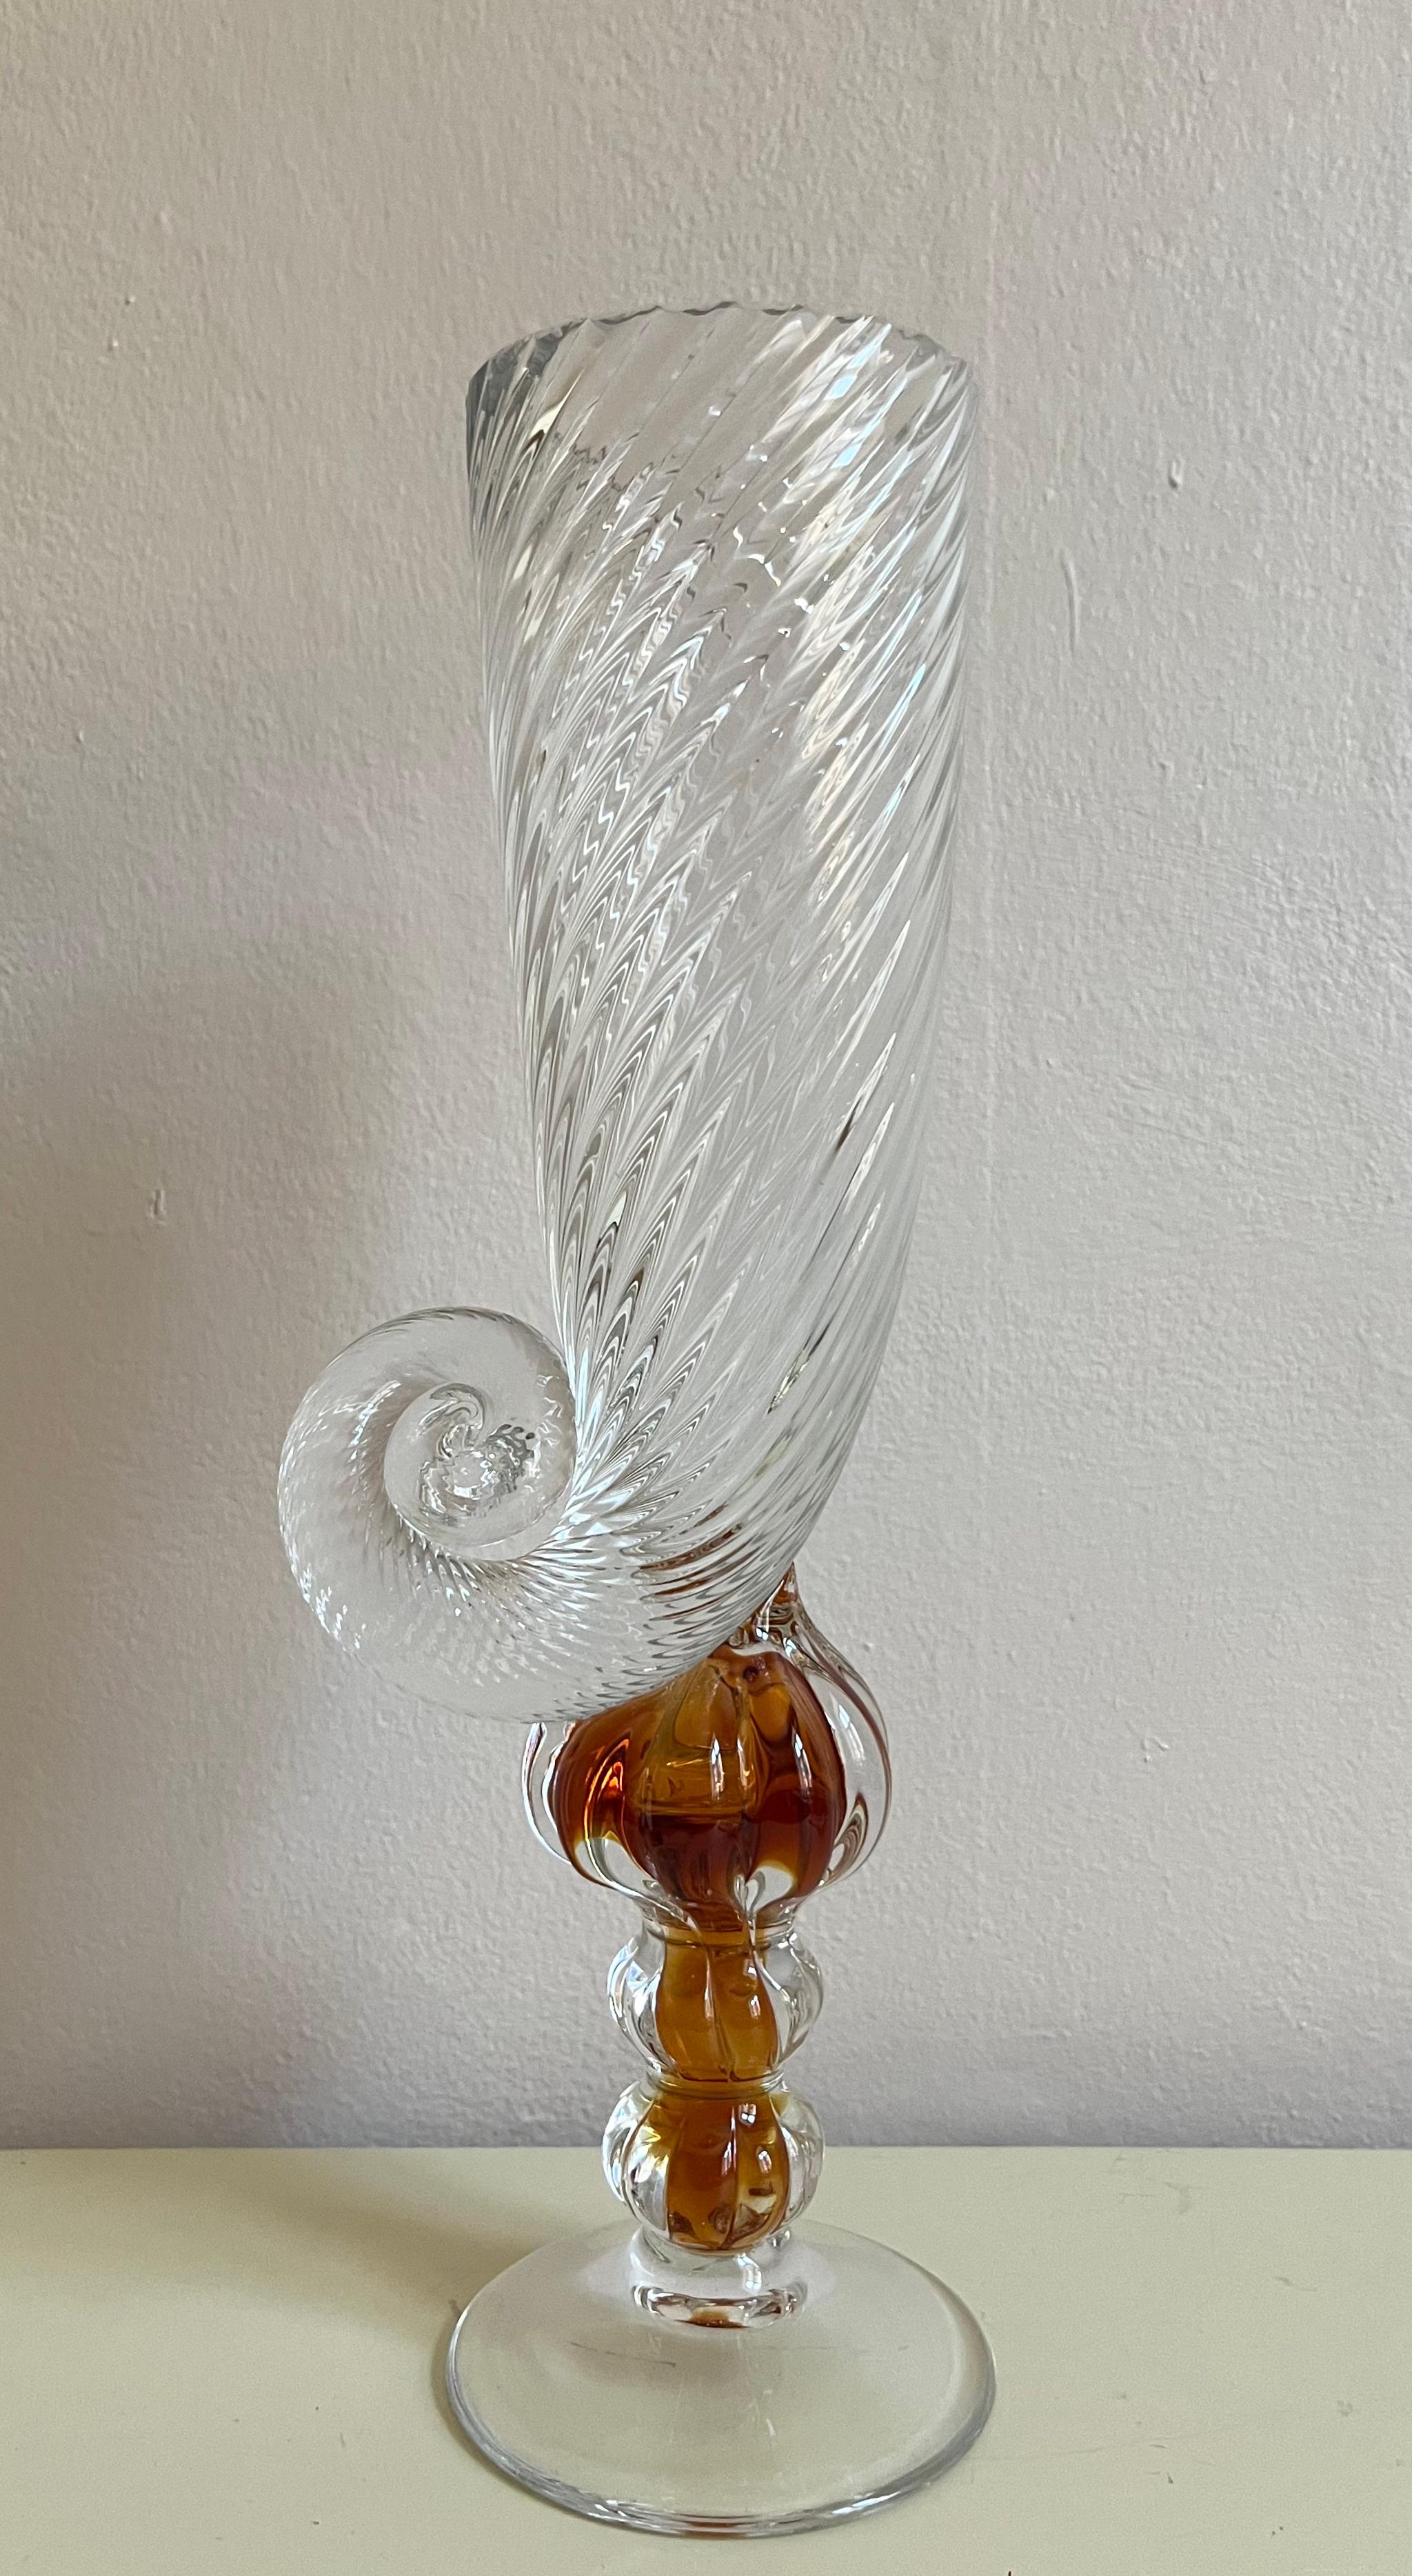 Swedish art glass vase in the shape of a conch shell

Swirly, tall piece of Swedish art glass in organic shapes of a conch shell in clear heavy glass on a clear and brown foot. Tall, decorative and no flaws.

Height: 36 cm (14.2 in).